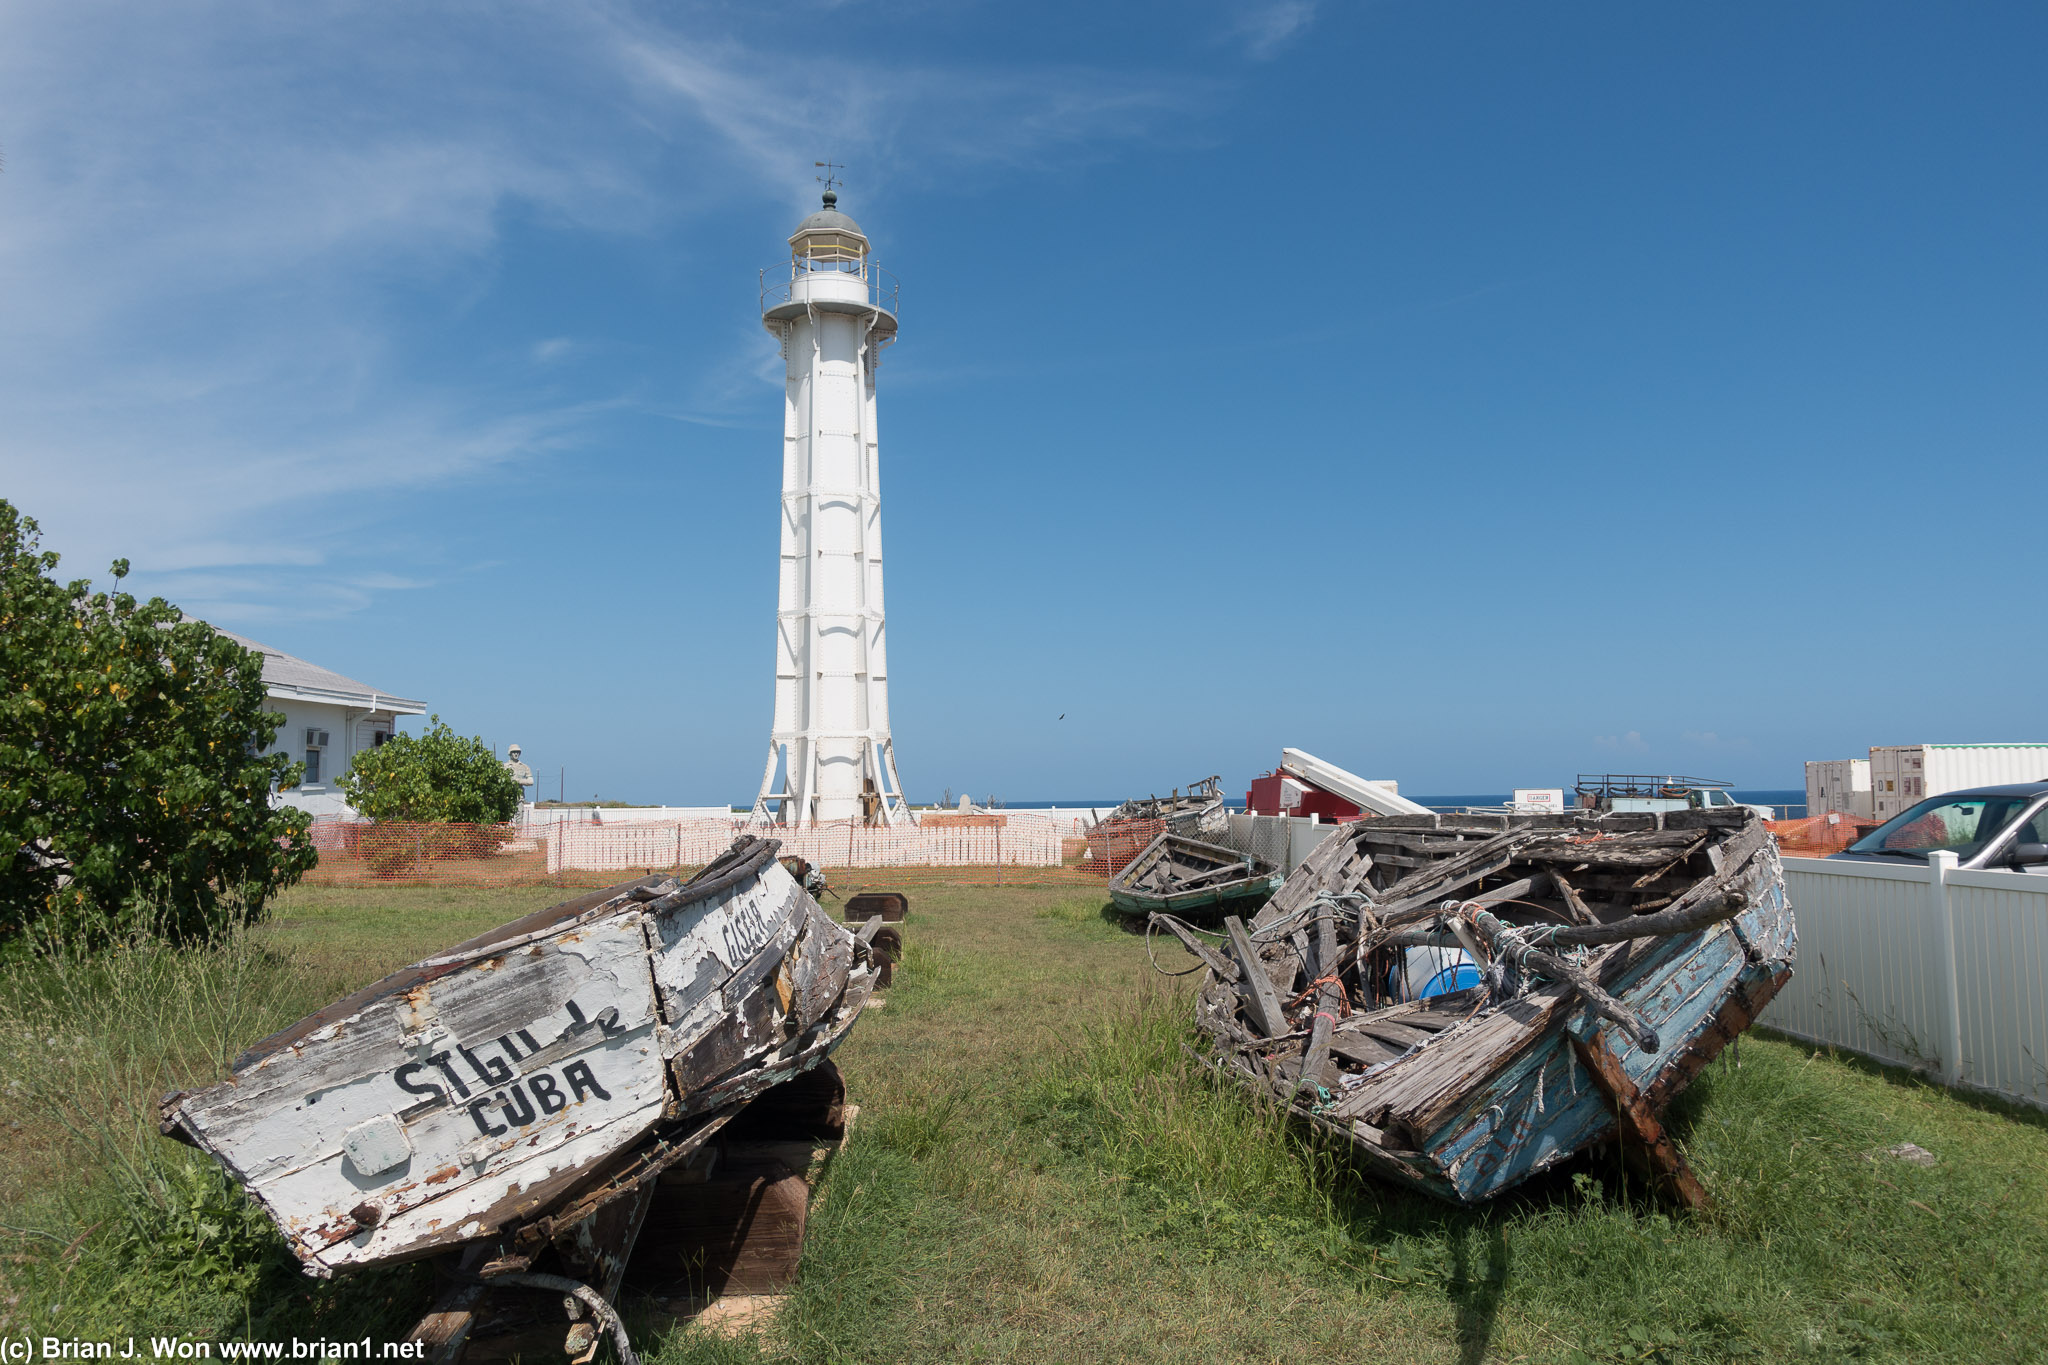 The old lighthouse, boats used by Cubans trying to escape Cuba in the foreground.